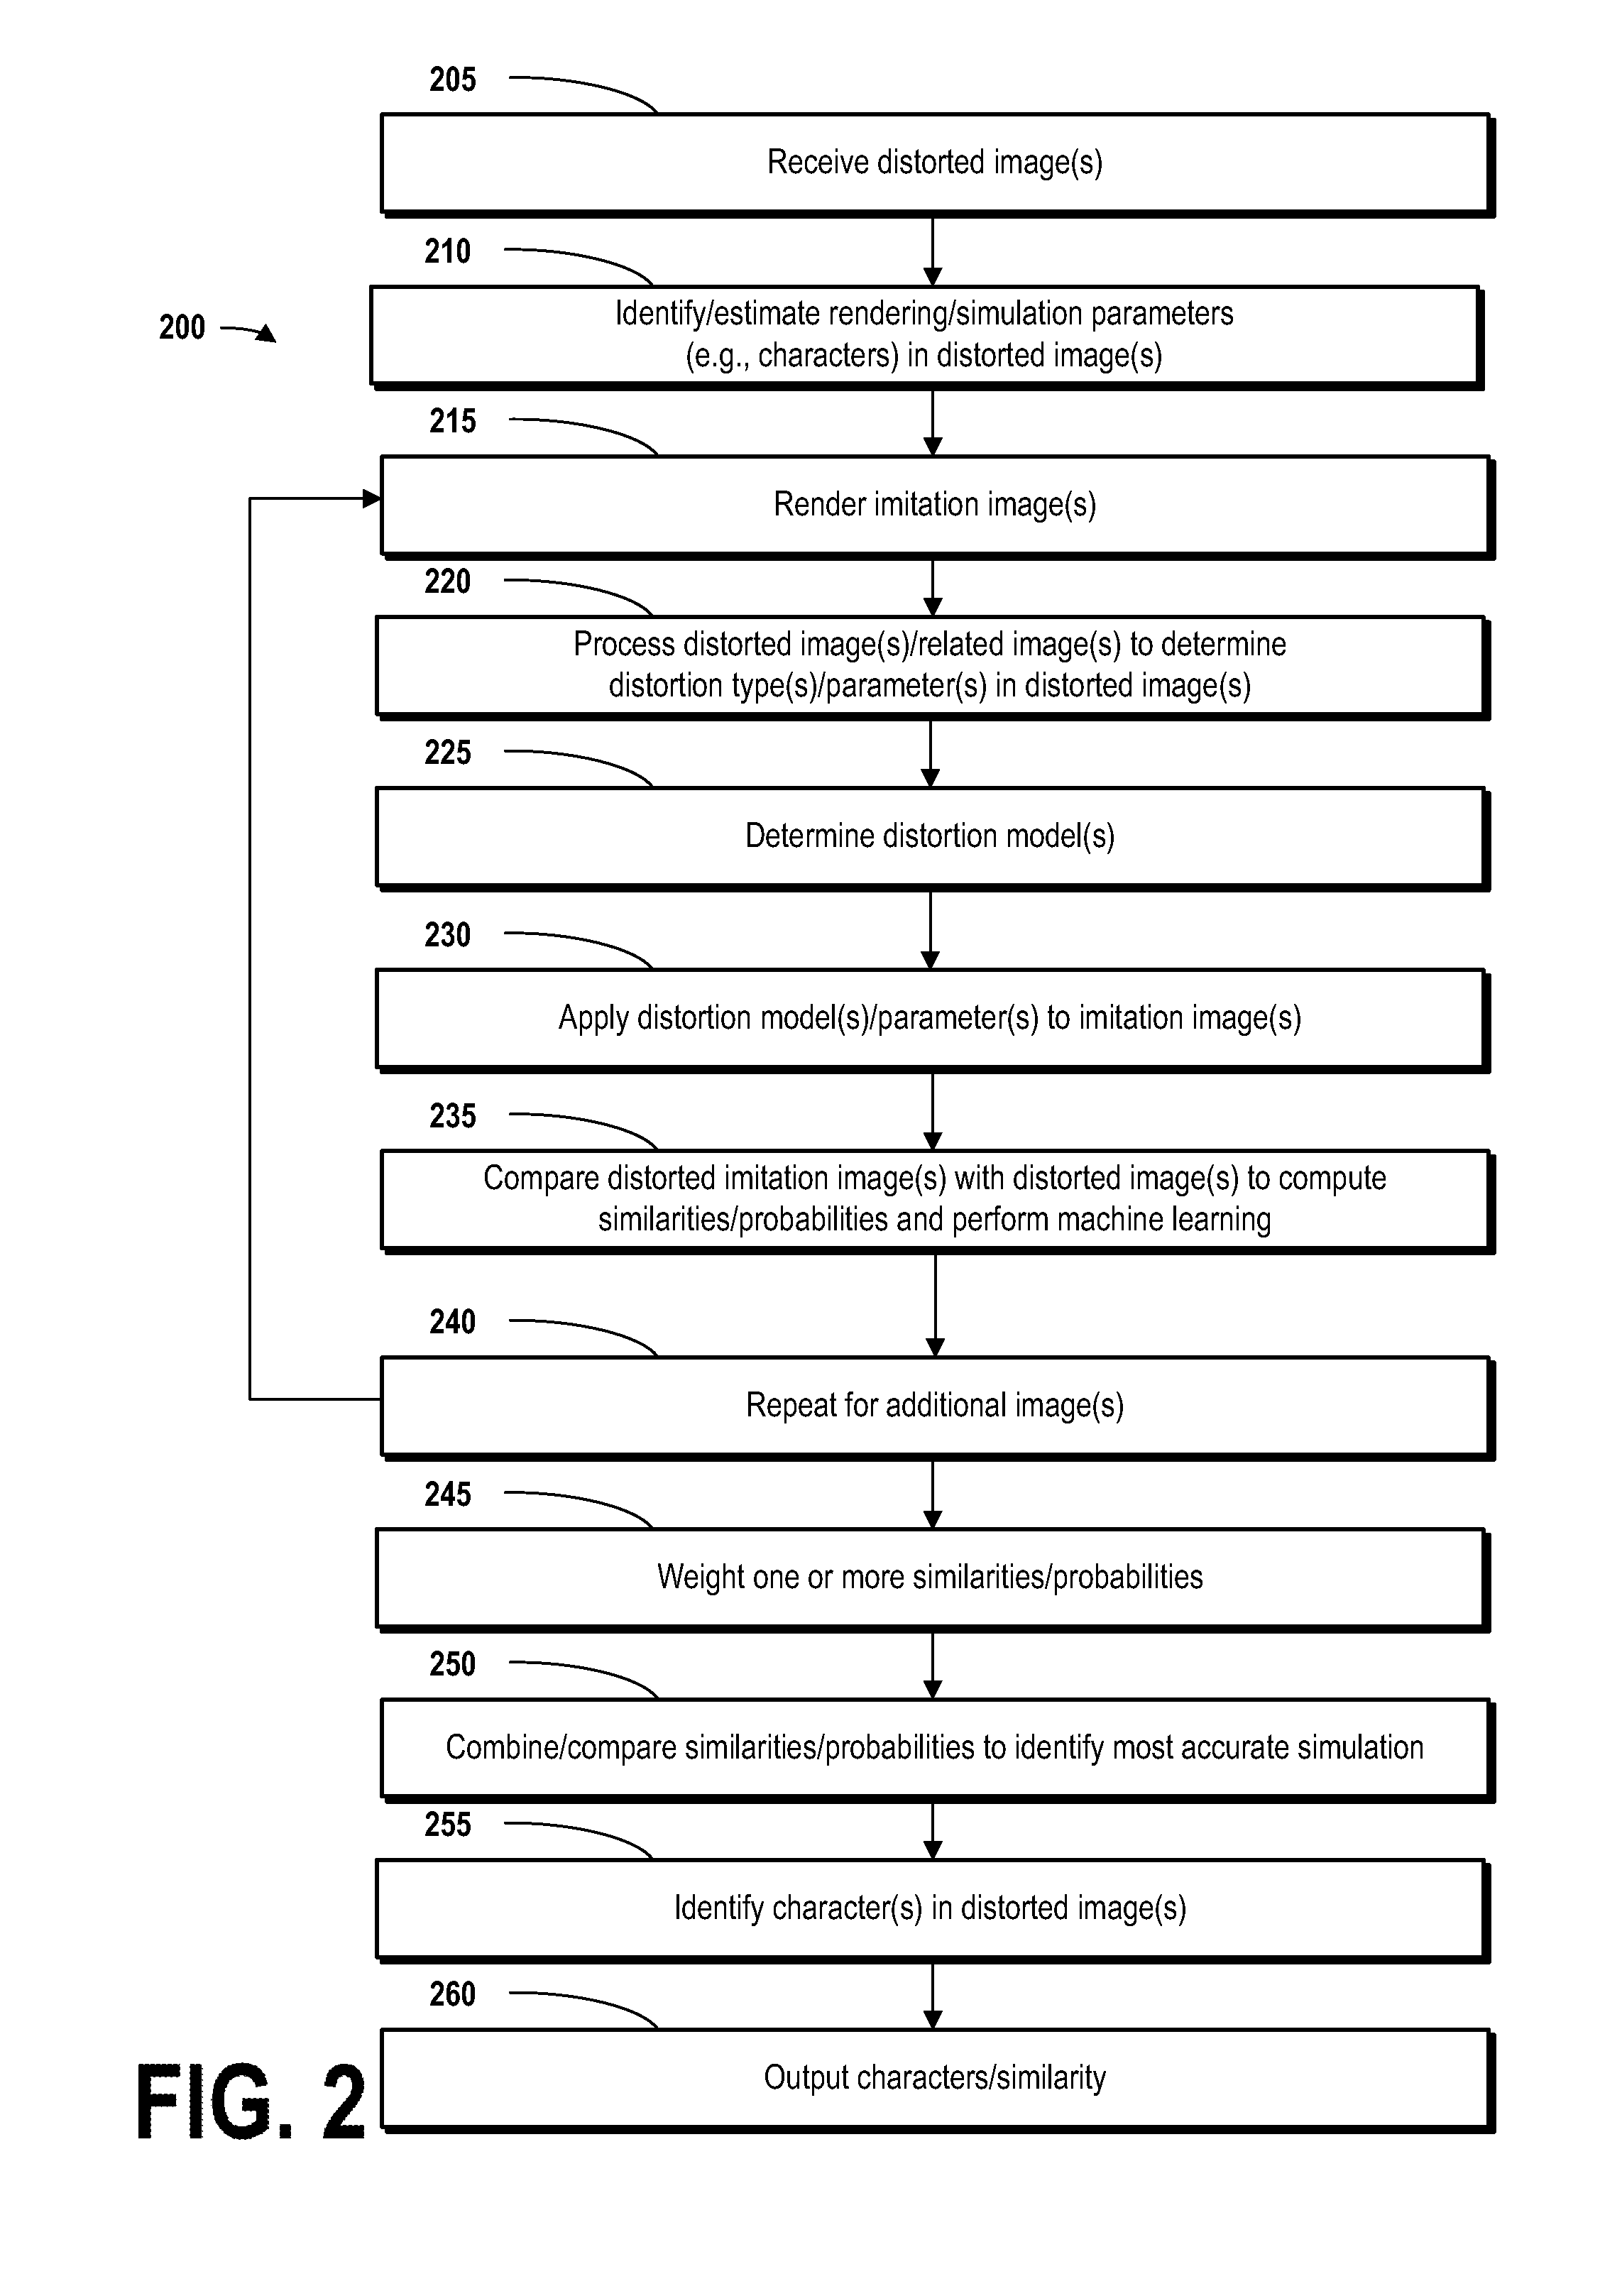 System and method for improved character recognition in distorted images